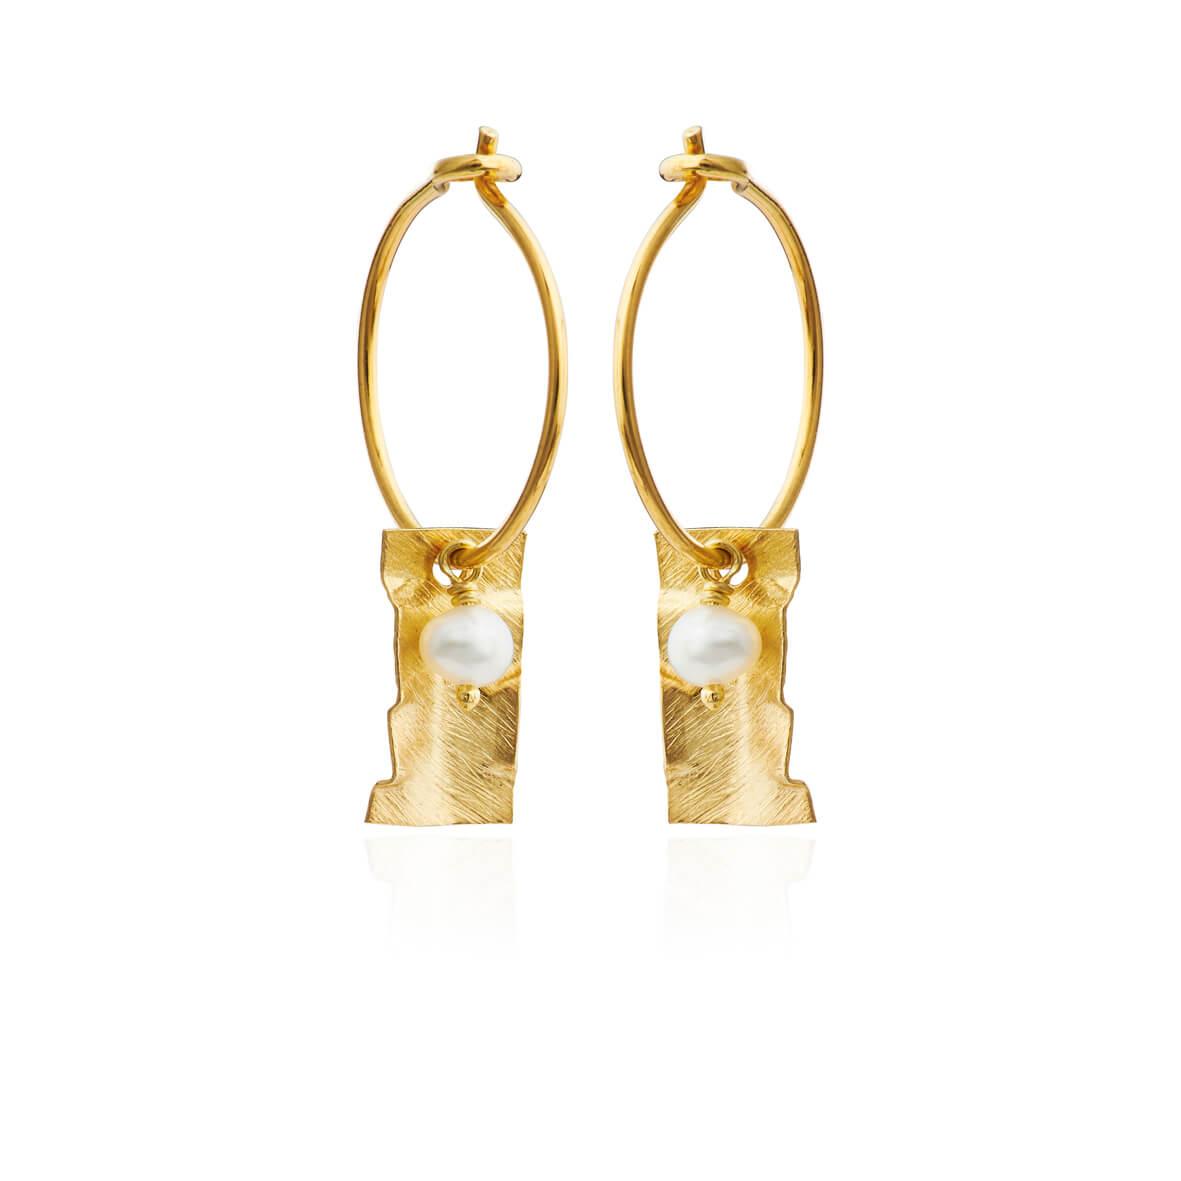 Hoops in gold plated silver with pearls / 5626-2-900Susanne Friis ...